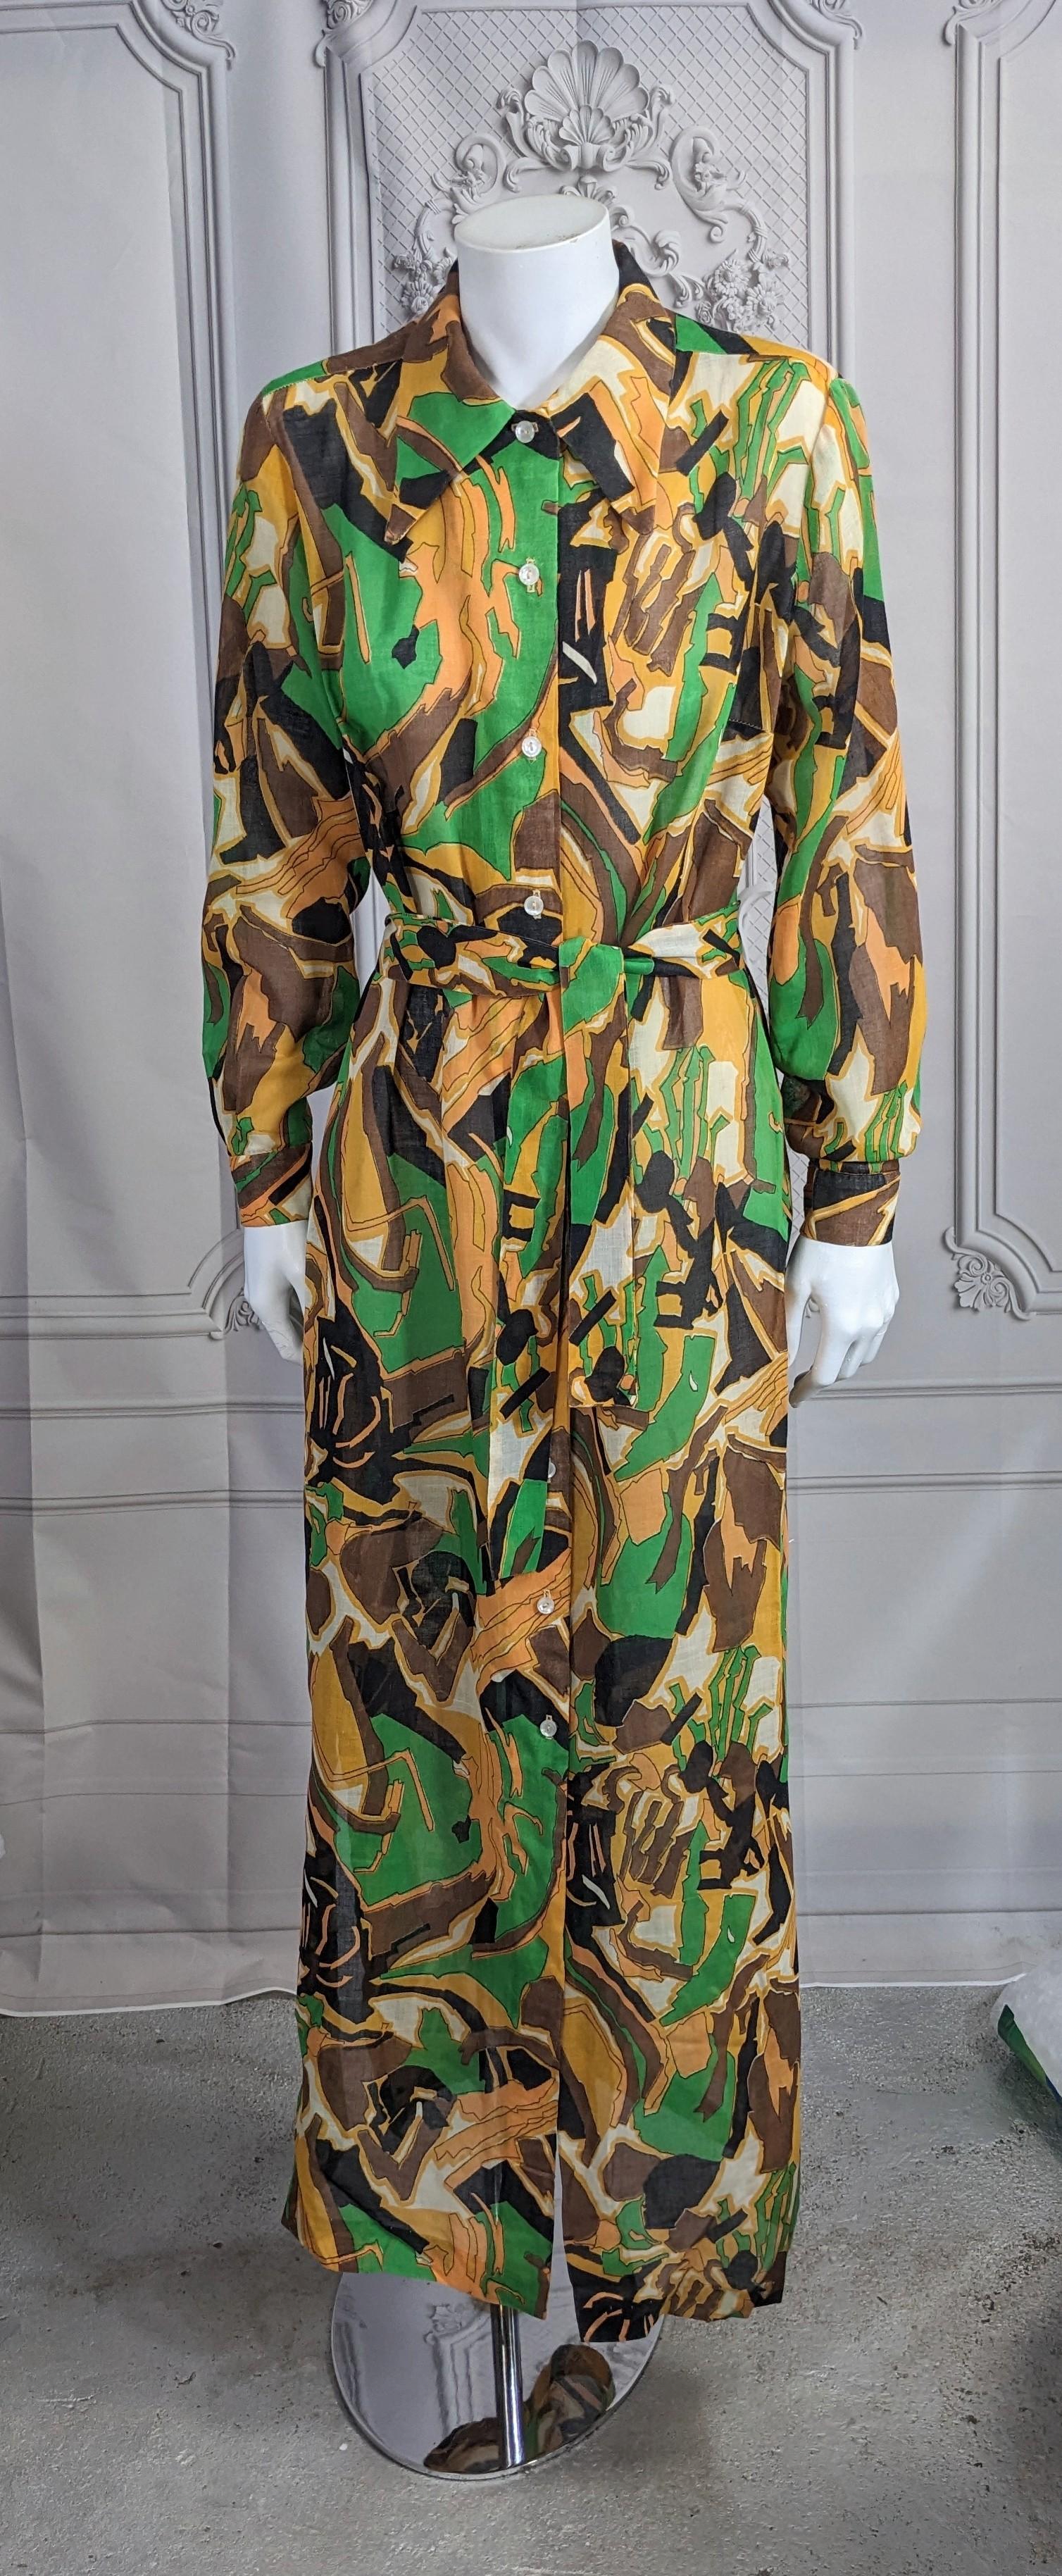 Striking 1970's Maxi Shirtwaist in cool semi sheer cotton blend in amazing graphic print. Straight full cut falling from small shoulders. Self fabric belt and side slits at hem. 1970's USA. 